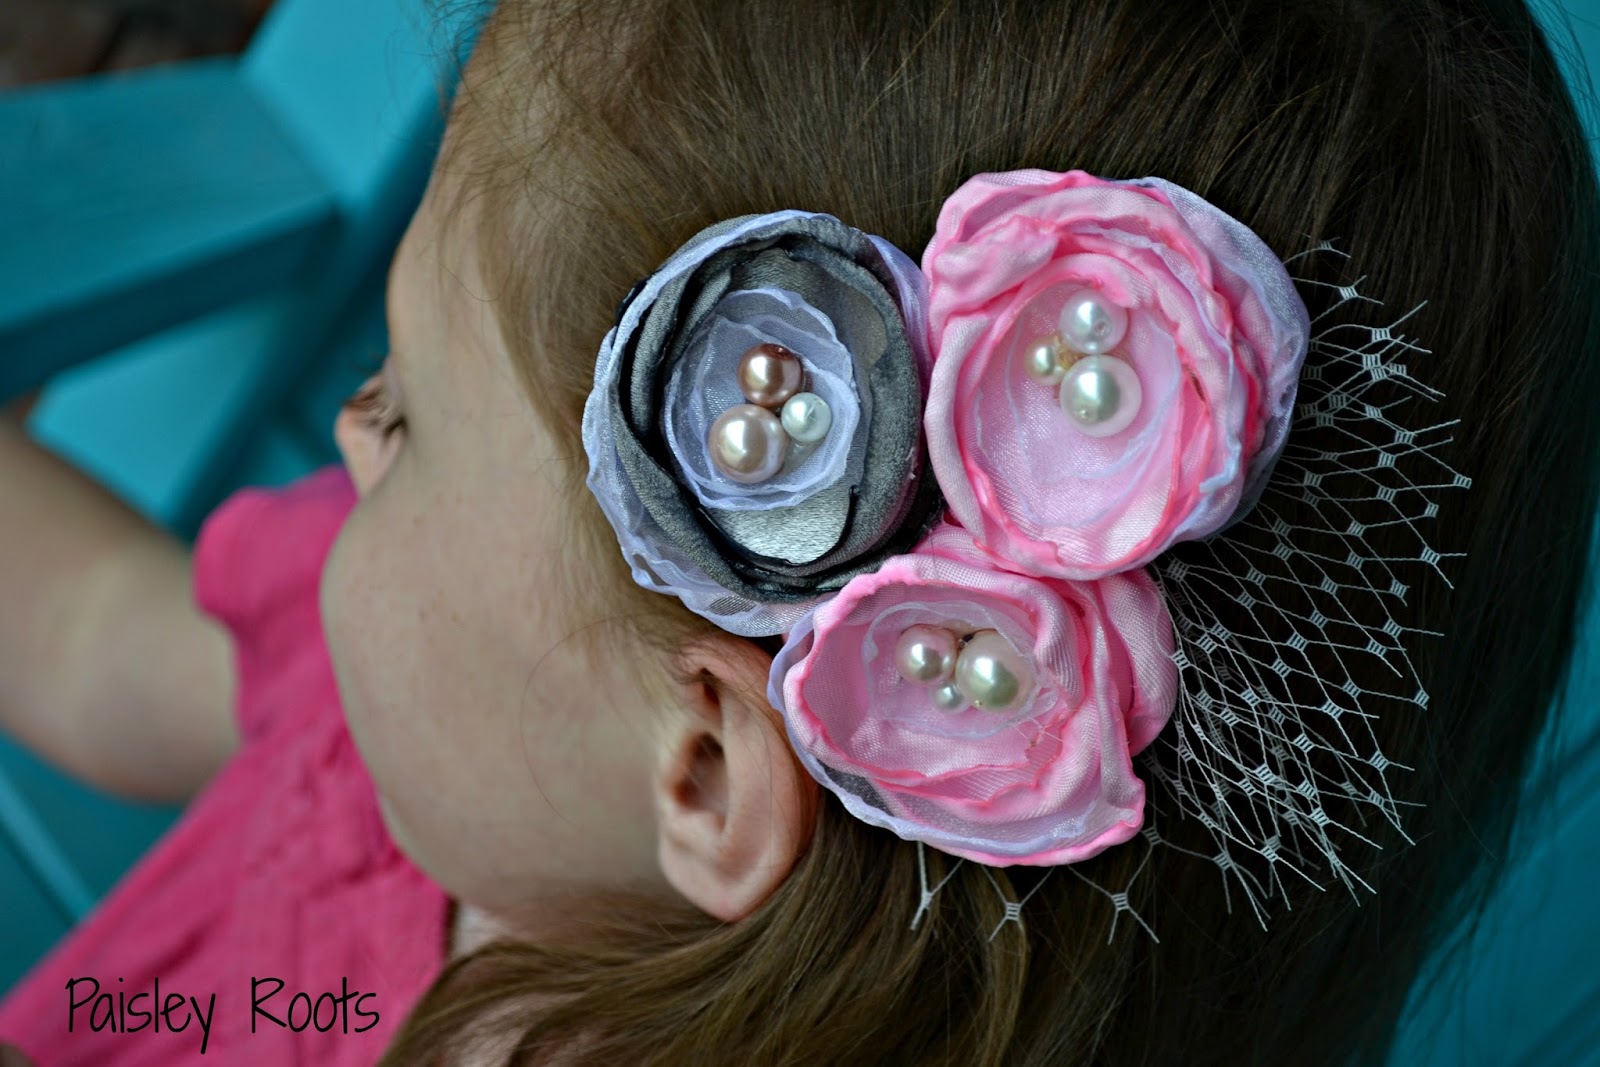 Flower Hairbow Tutorial by Paisley Roots | Mabey She Made It | #flower #hairbow #tutorial #diy #hairaccessories